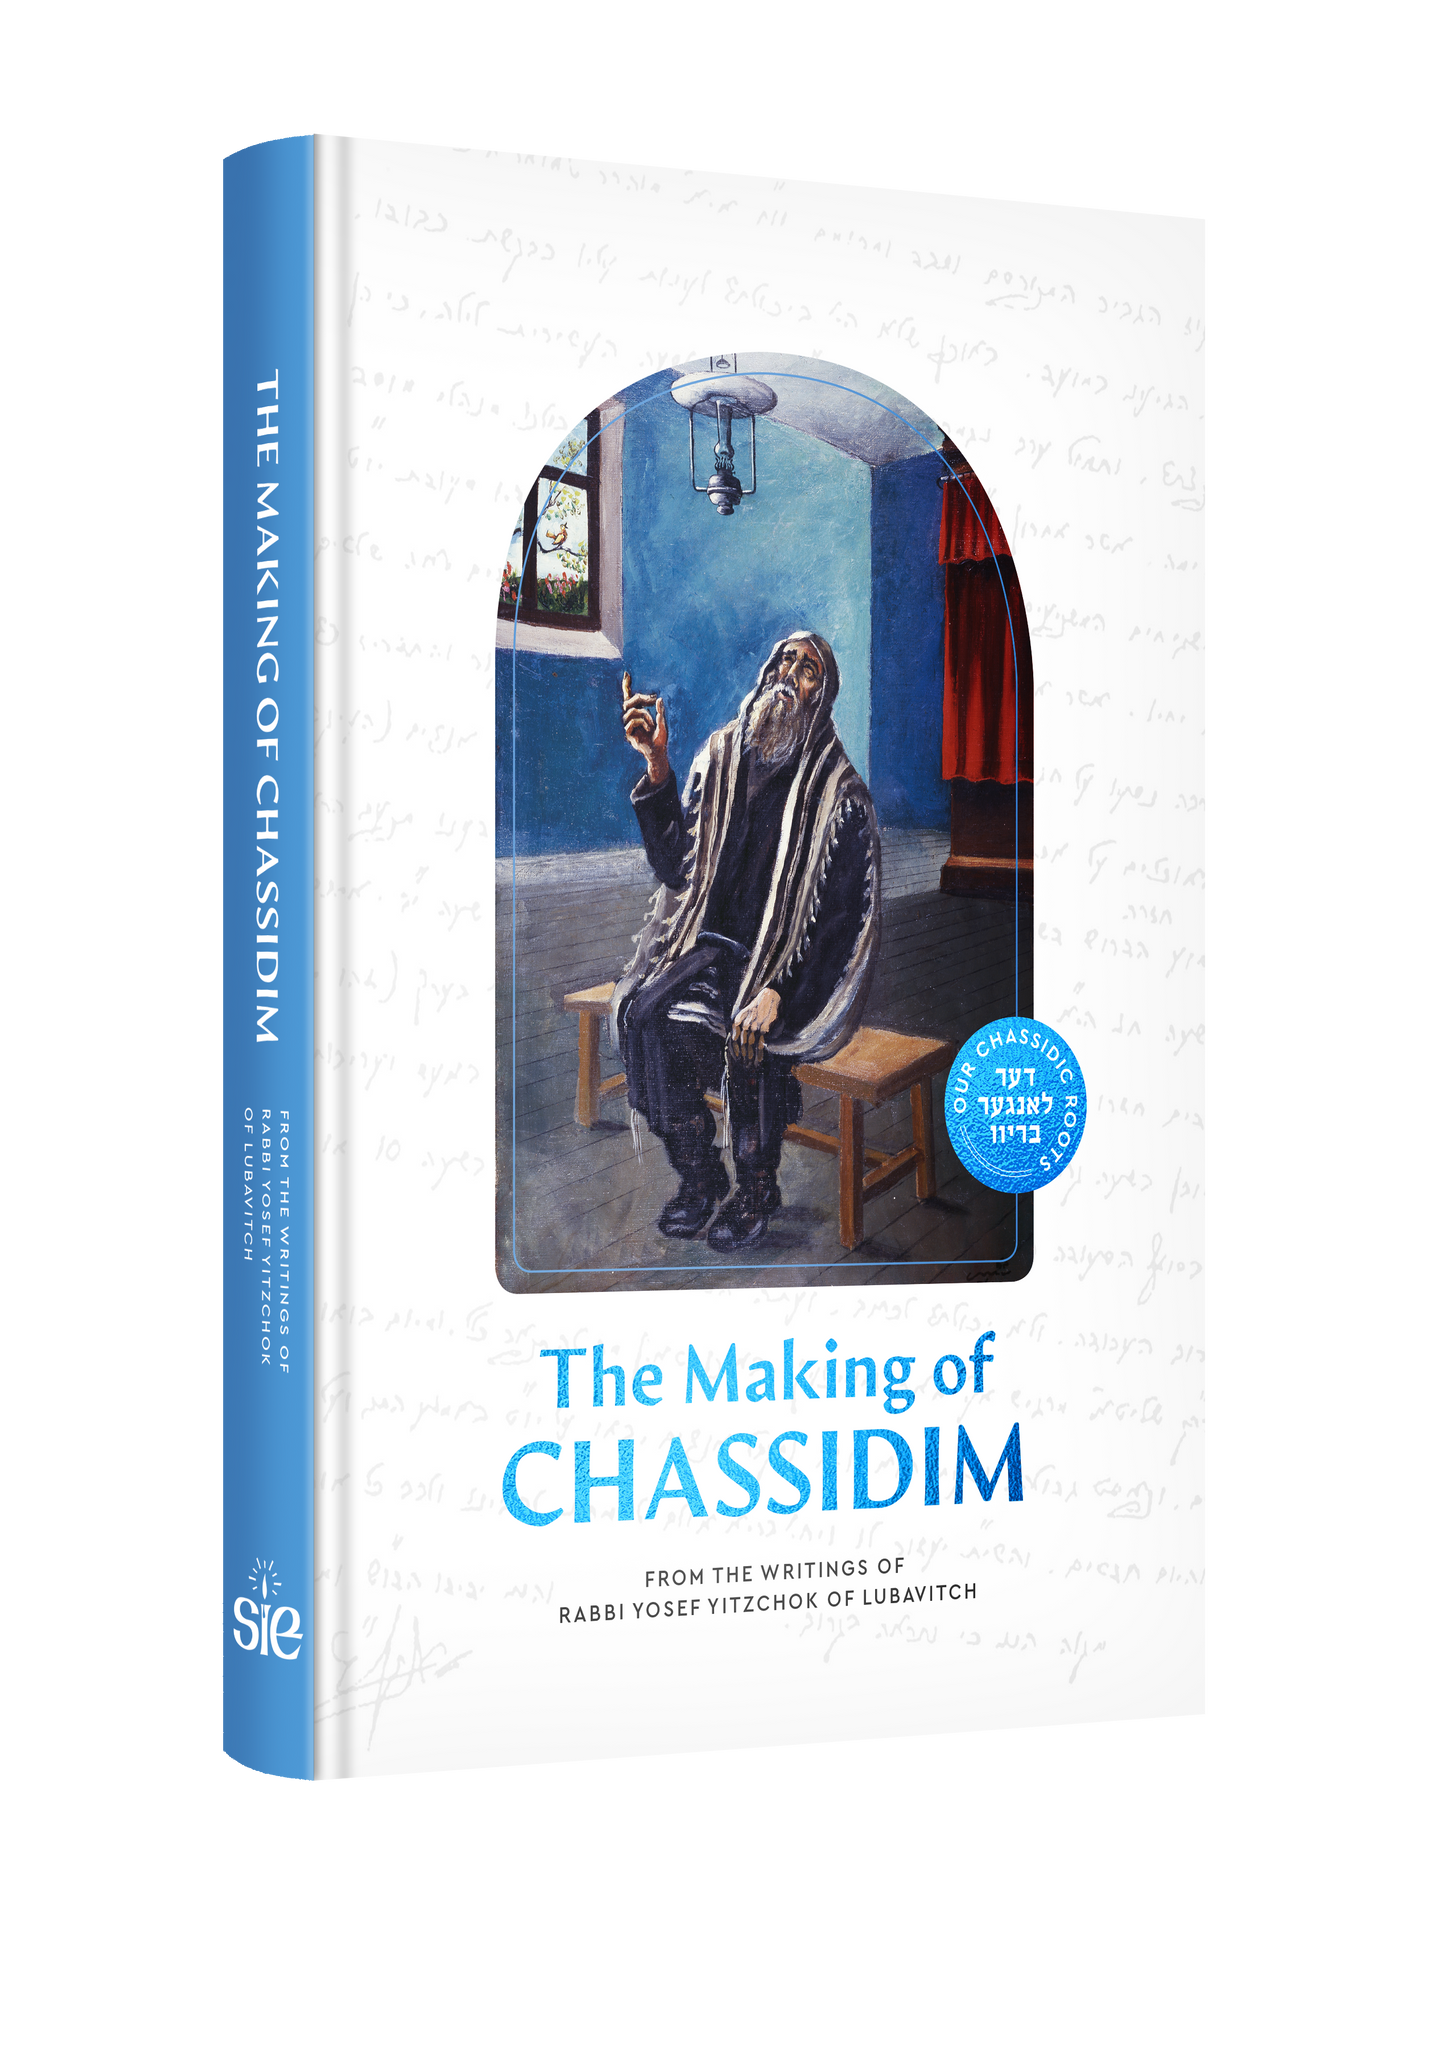 The Making of Chassidim